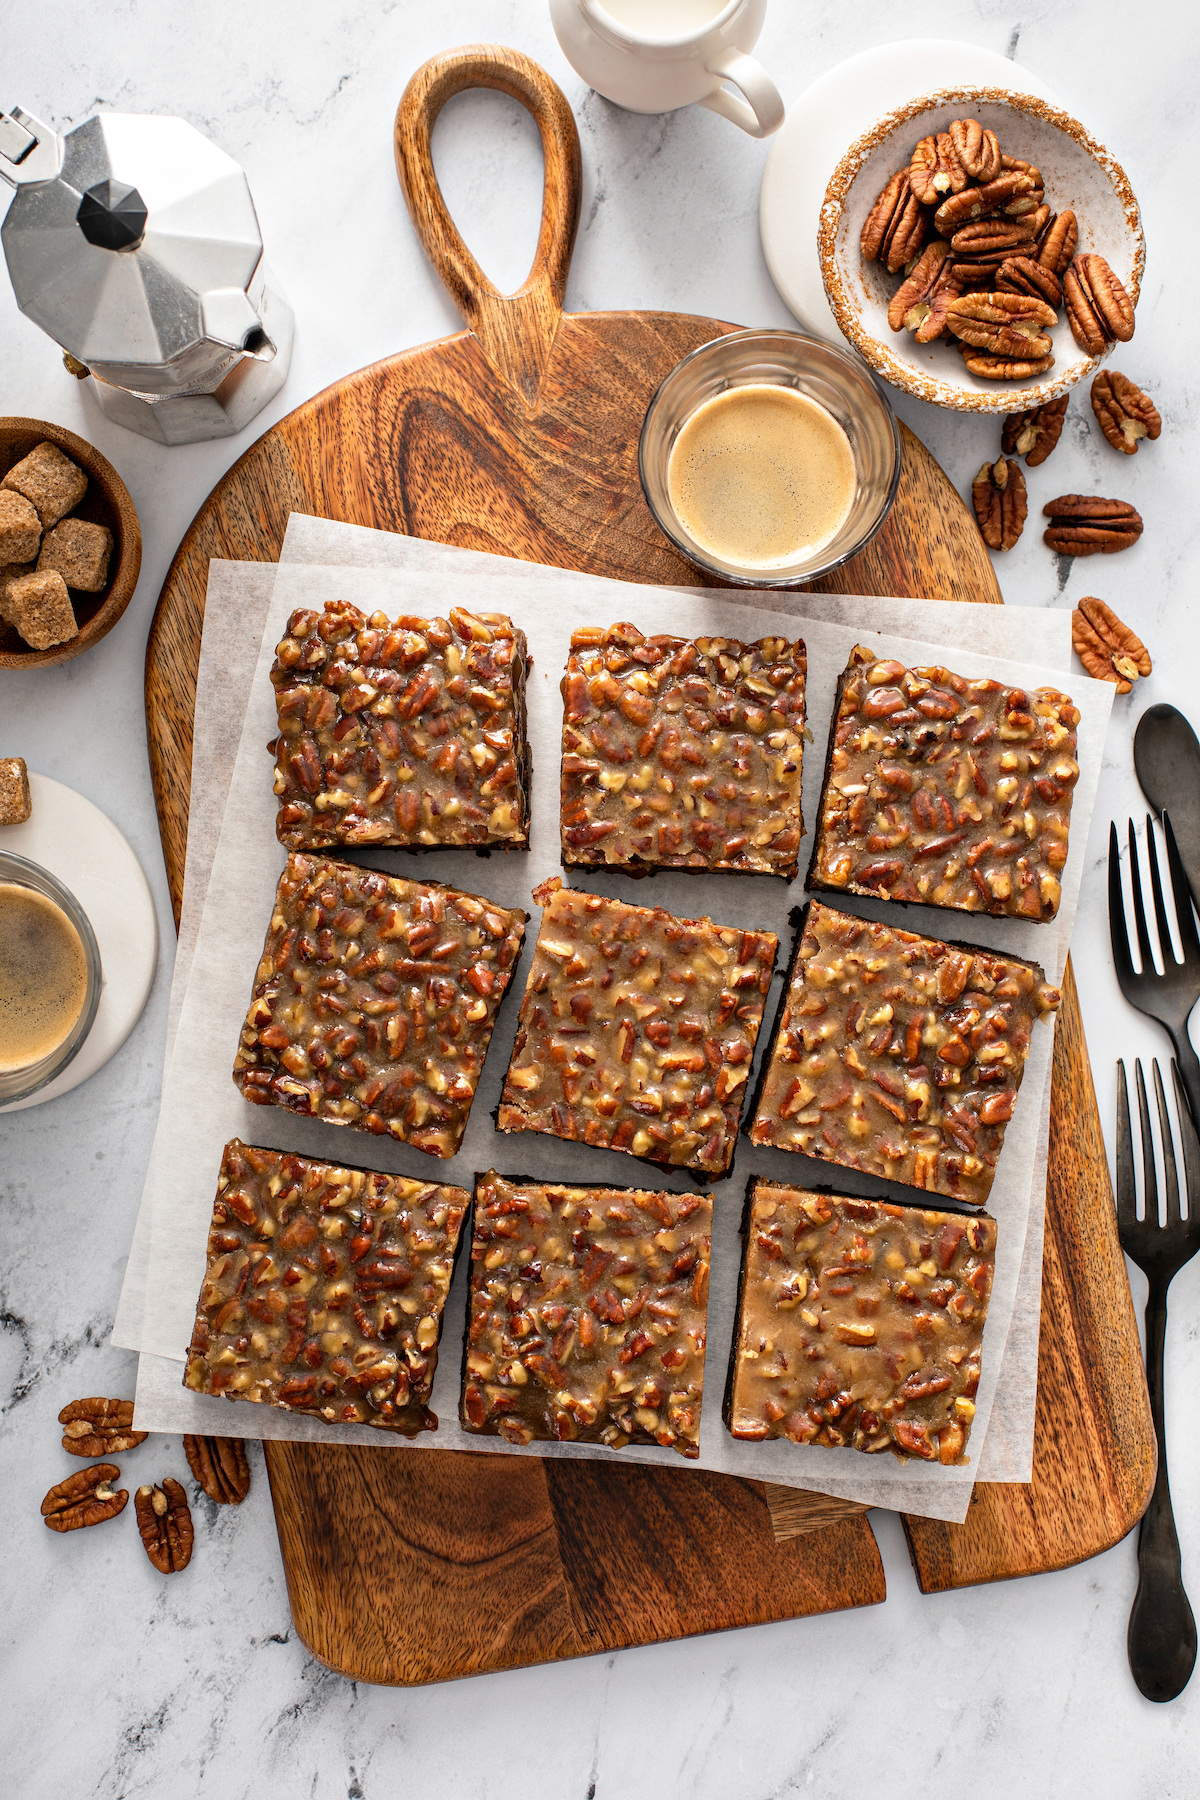 Pecan pie brownies sliced into squares on parchment paper on a cutting board.